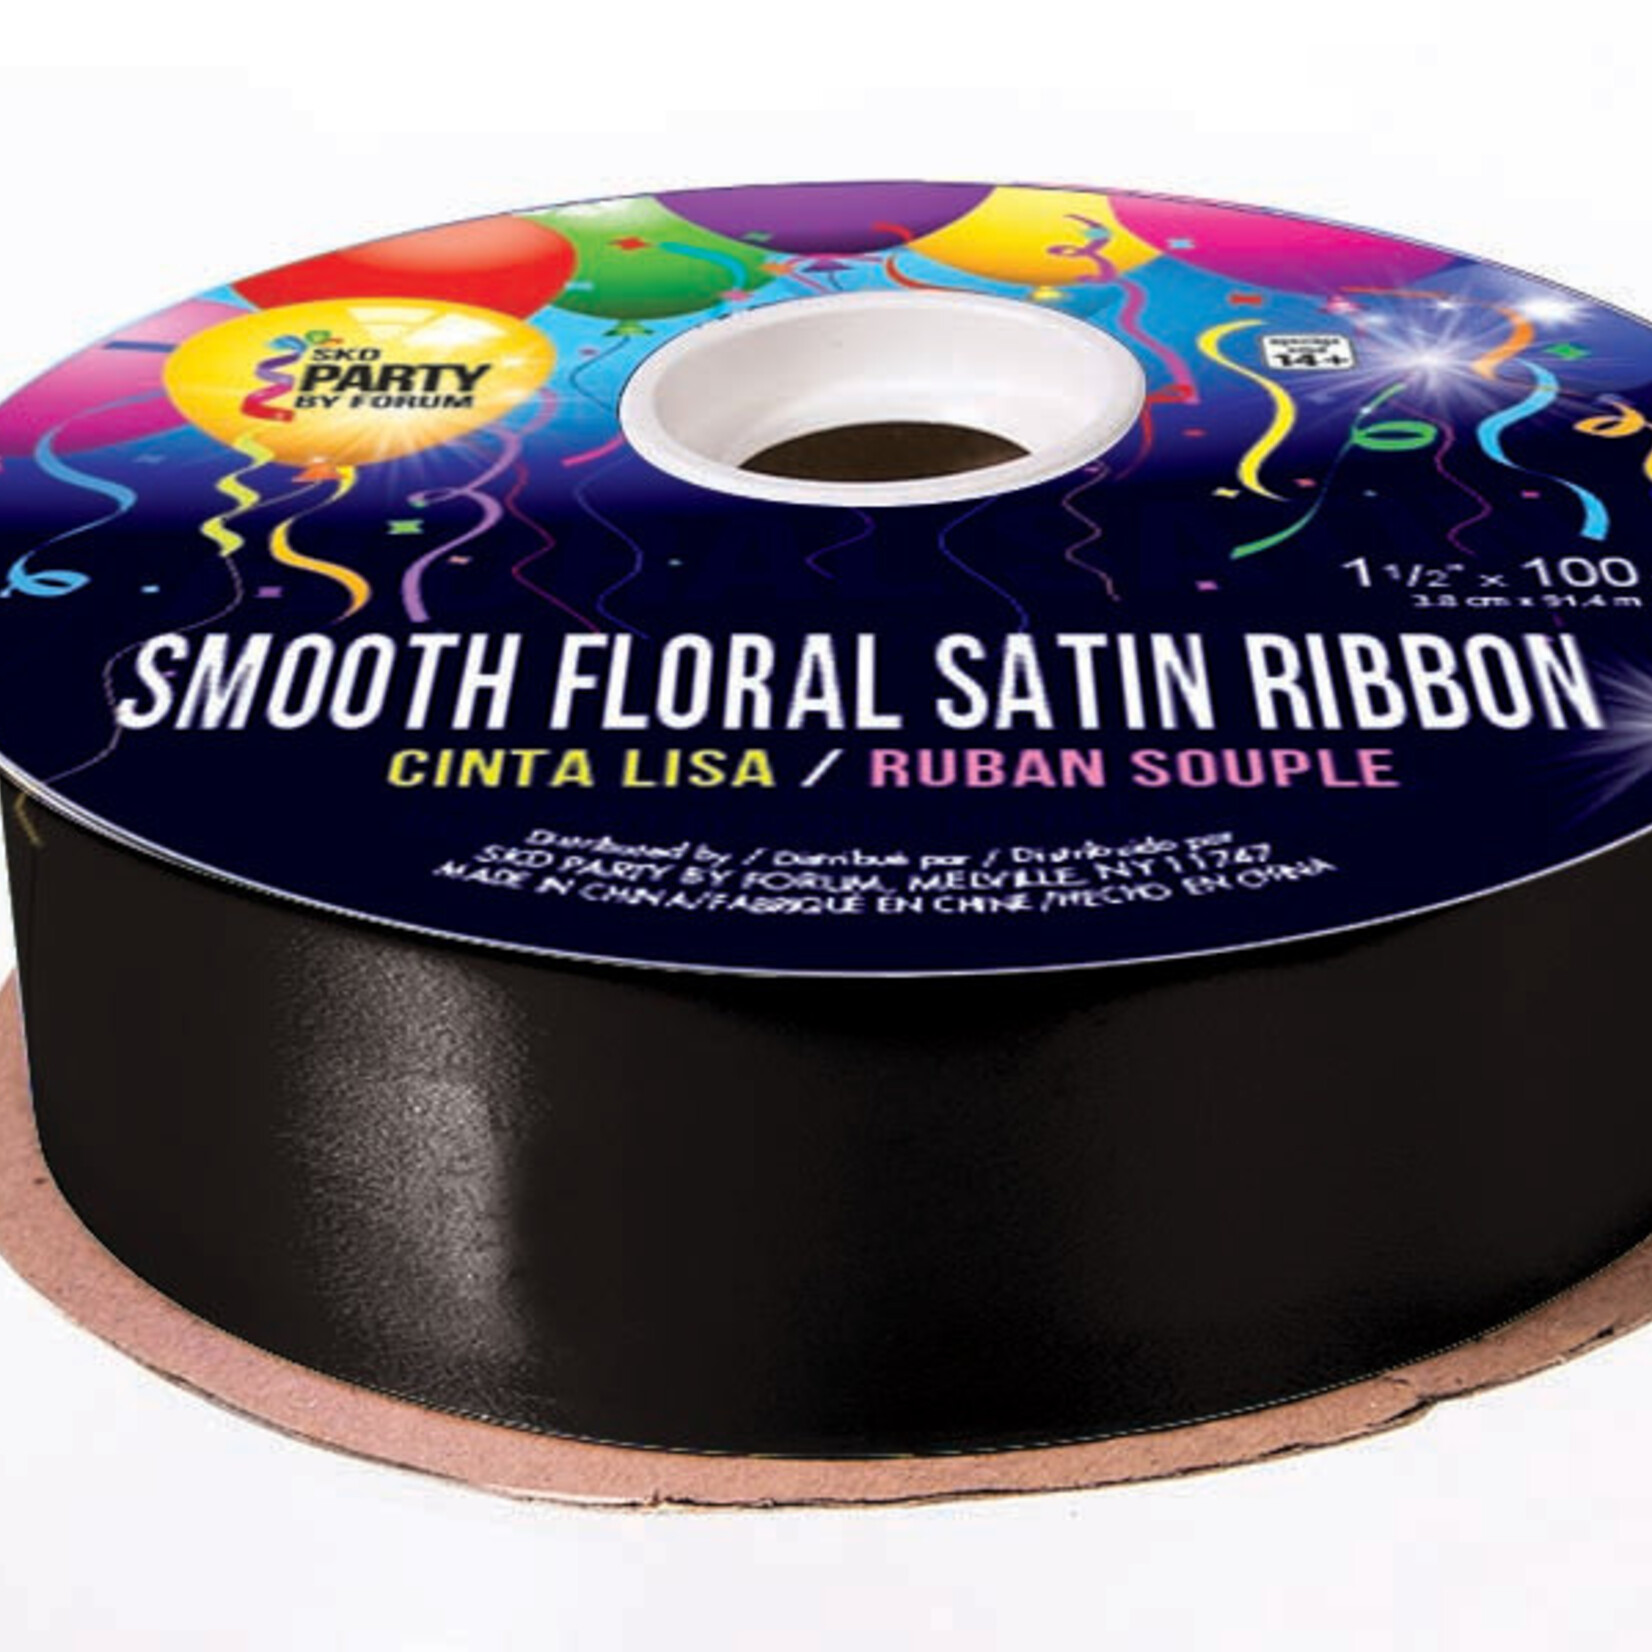 Smooth Floral Satin Ribbon 1 1/2 inches